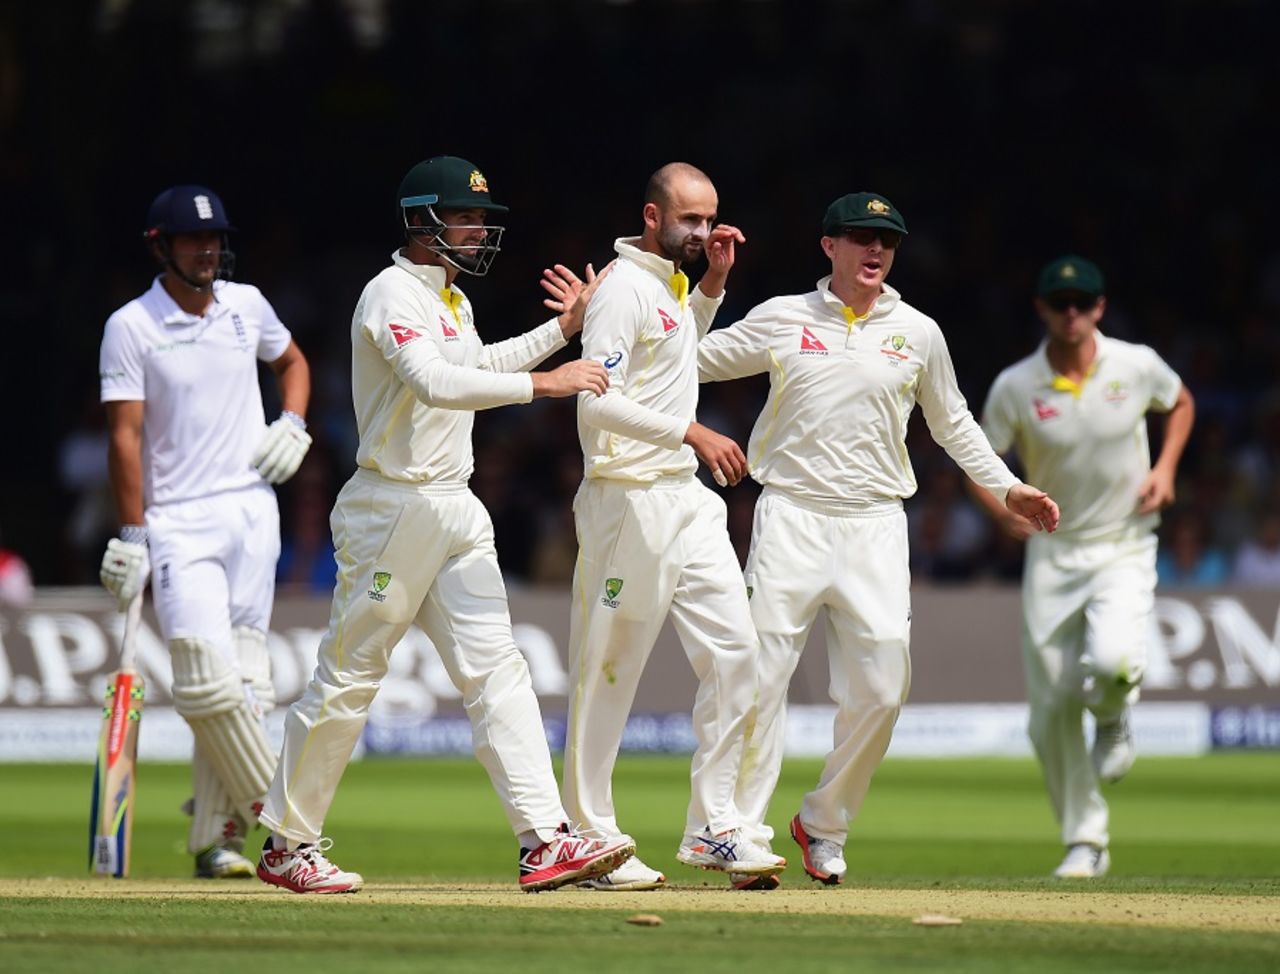 Nathan Lyon is flanked by his team-mates, England v Australia, 2nd Investec Ashes Test, Lord's, 3rd day, July 18, 2015